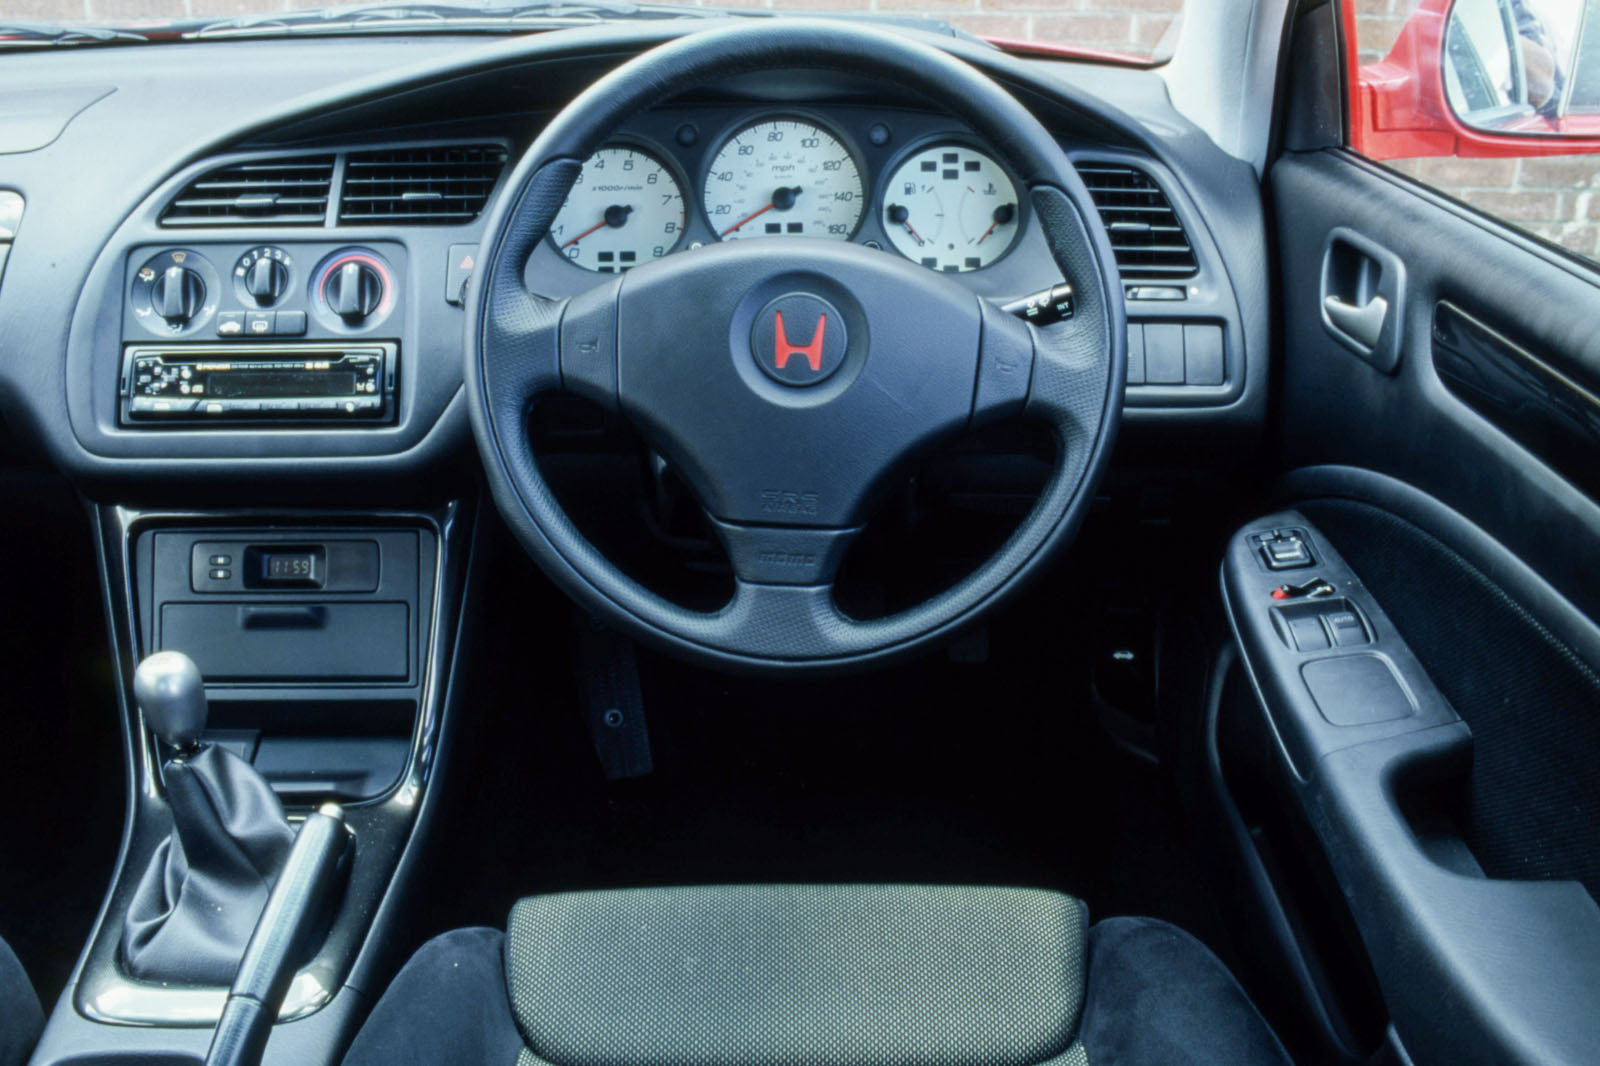 Honda Accord Type R Used Car Buying Guide Autocar